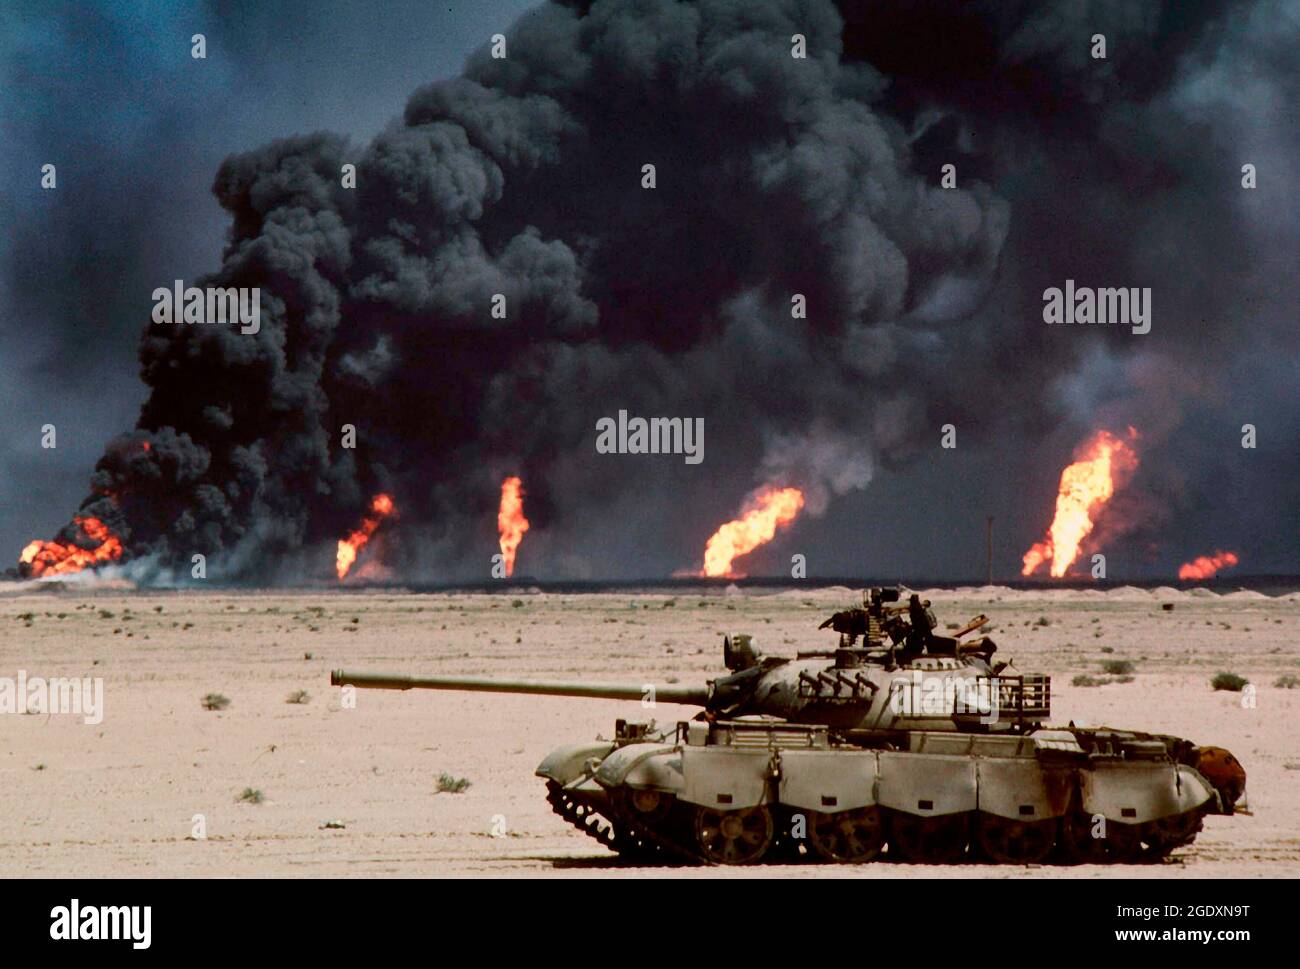 KUWAIT - February / March 1991 - An abandoned Russian-made T-62 tank in the desert in front of burning oil wells, images like these became an icon of Stock Photo